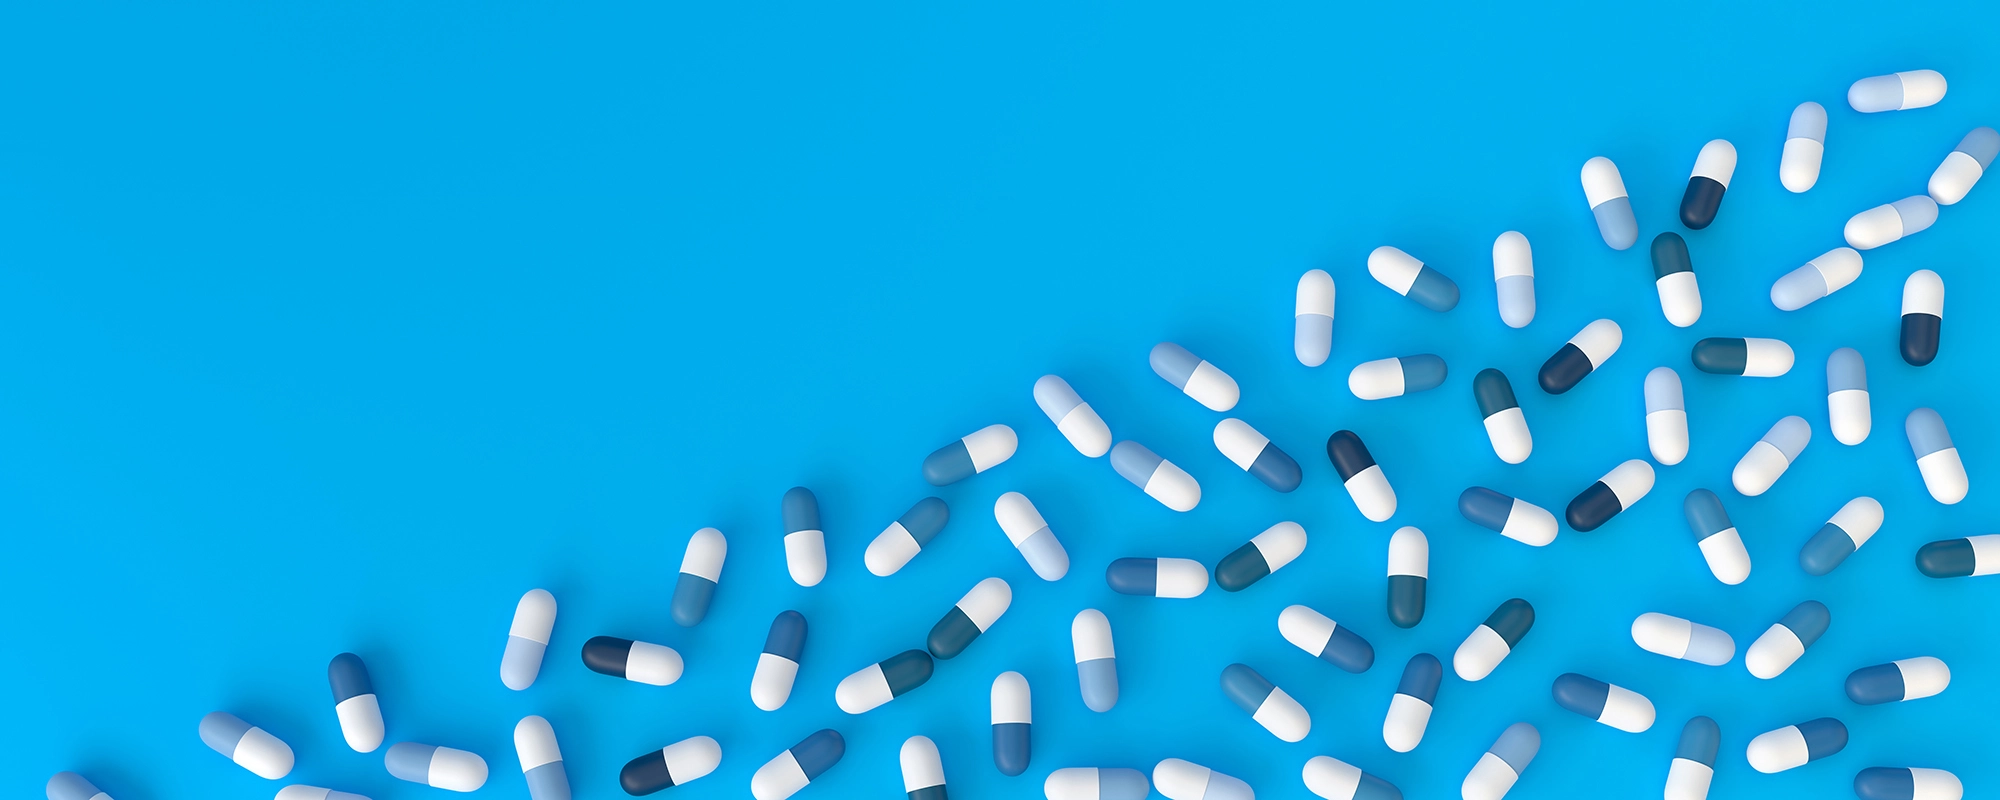 many blue pills diagonally poured on a blue background